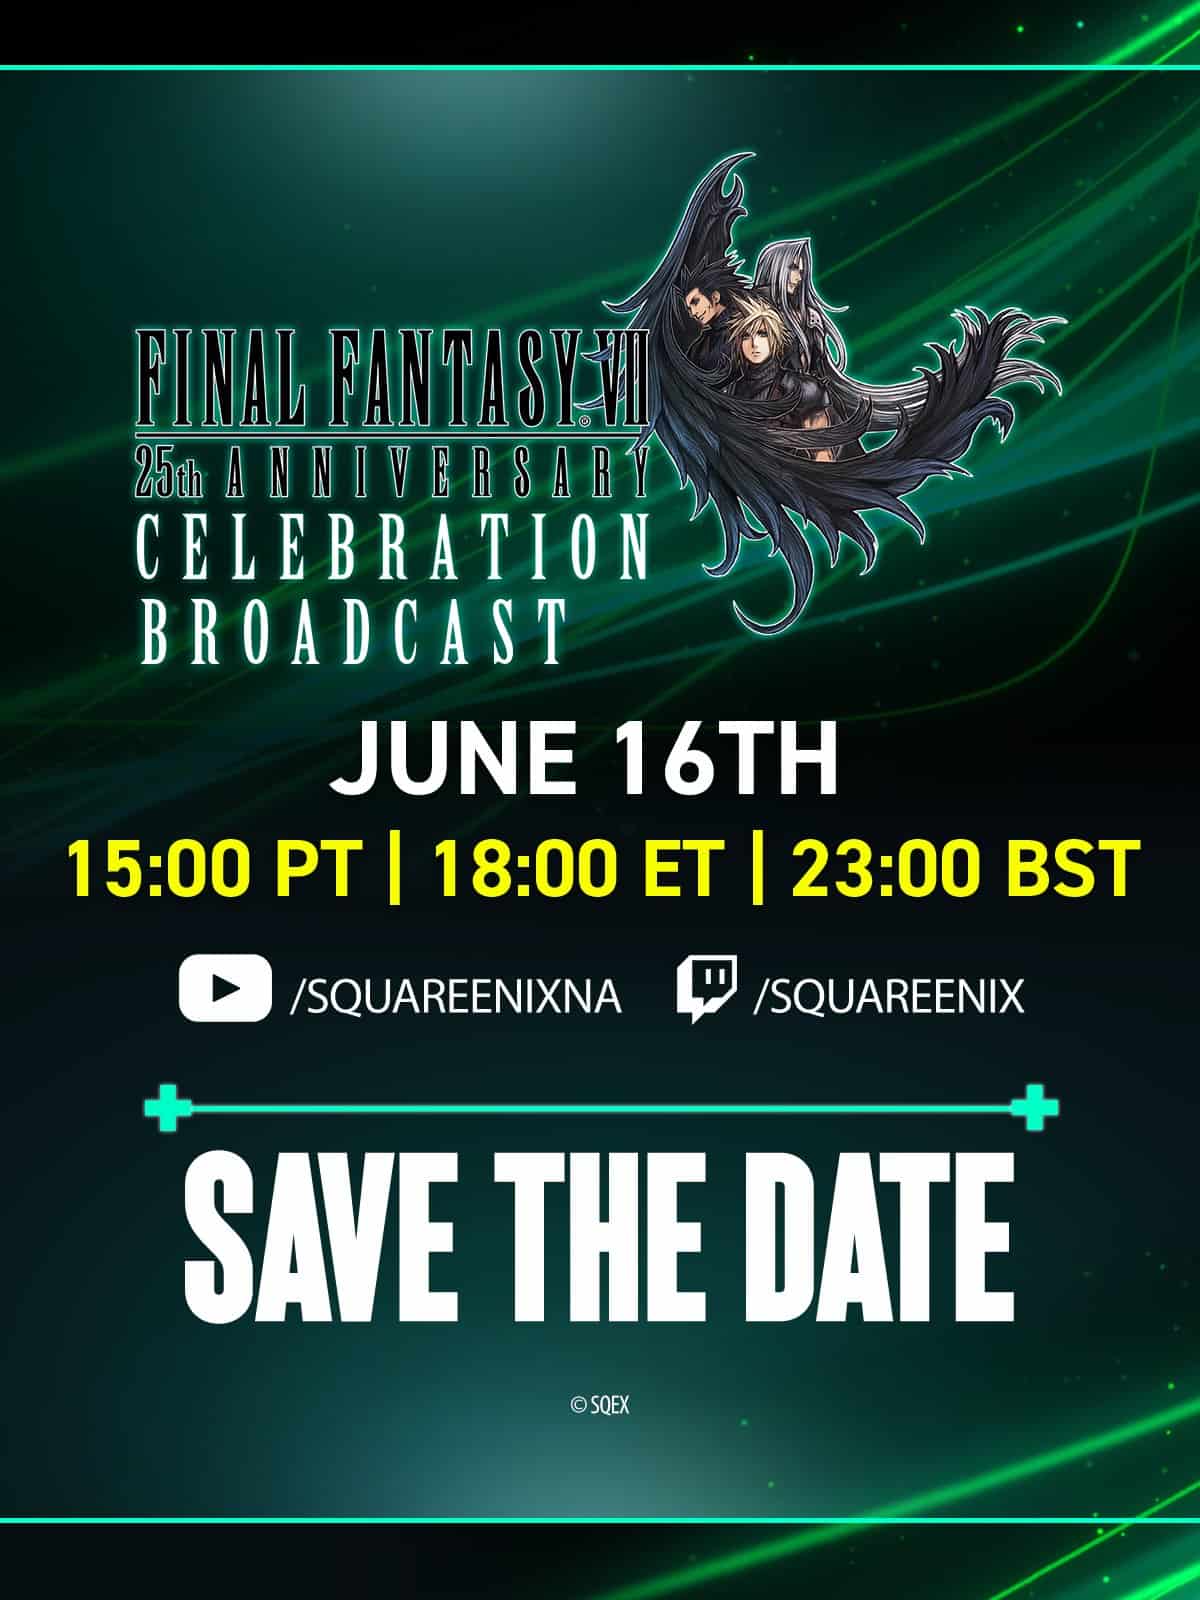 Final Fantasy 7 Livestream announcement poster with details on how to watch the livestream.